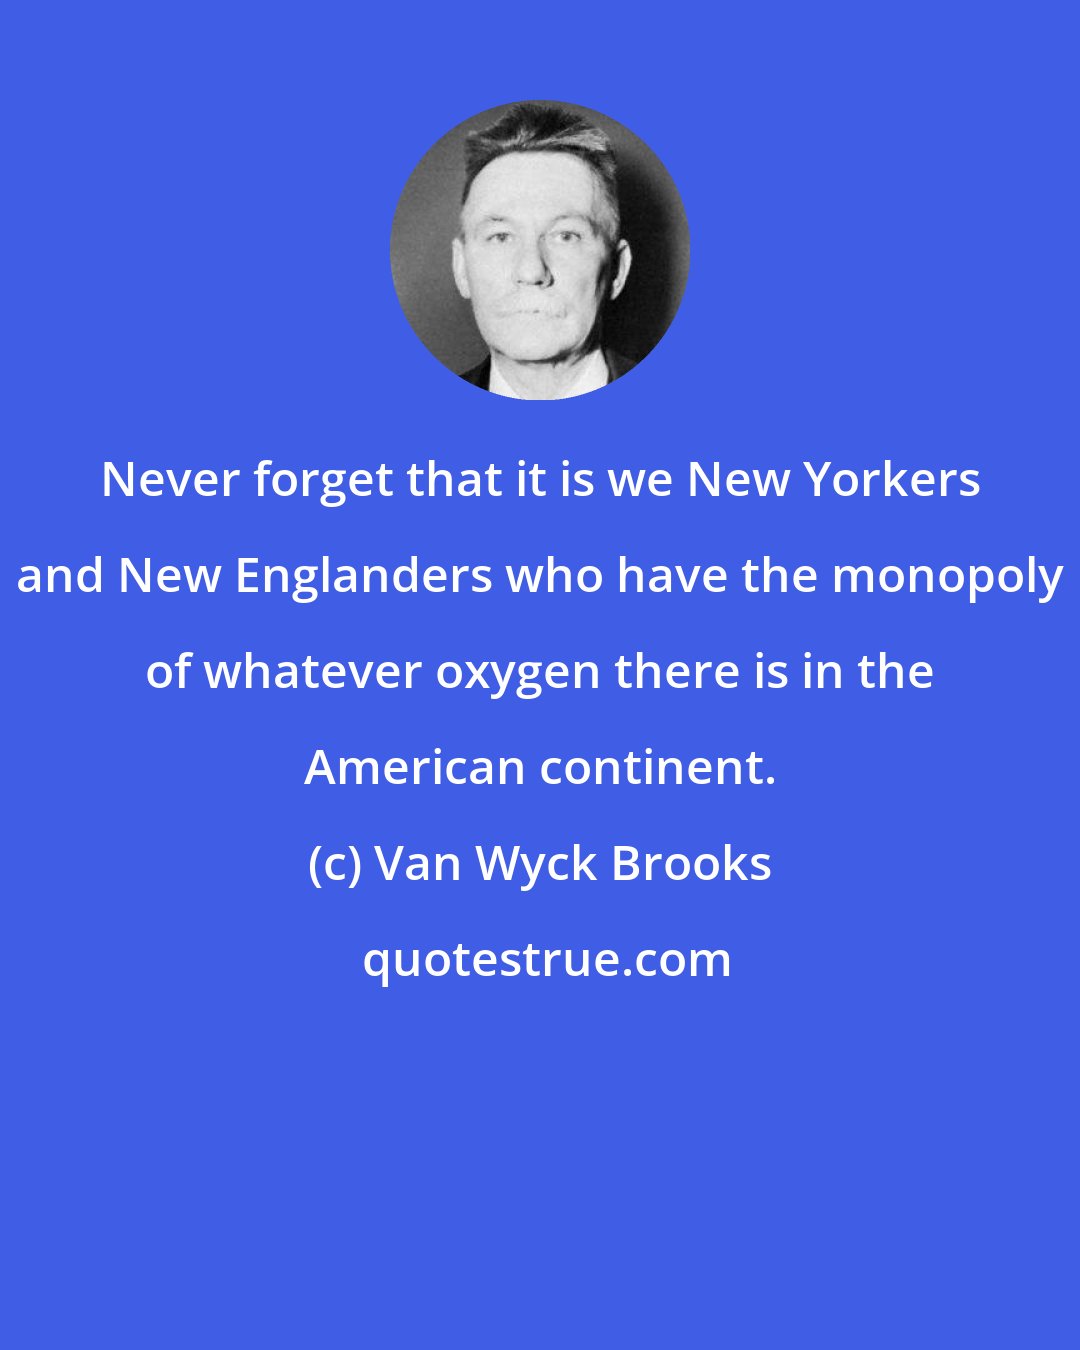 Van Wyck Brooks: Never forget that it is we New Yorkers and New Englanders who have the monopoly of whatever oxygen there is in the American continent.